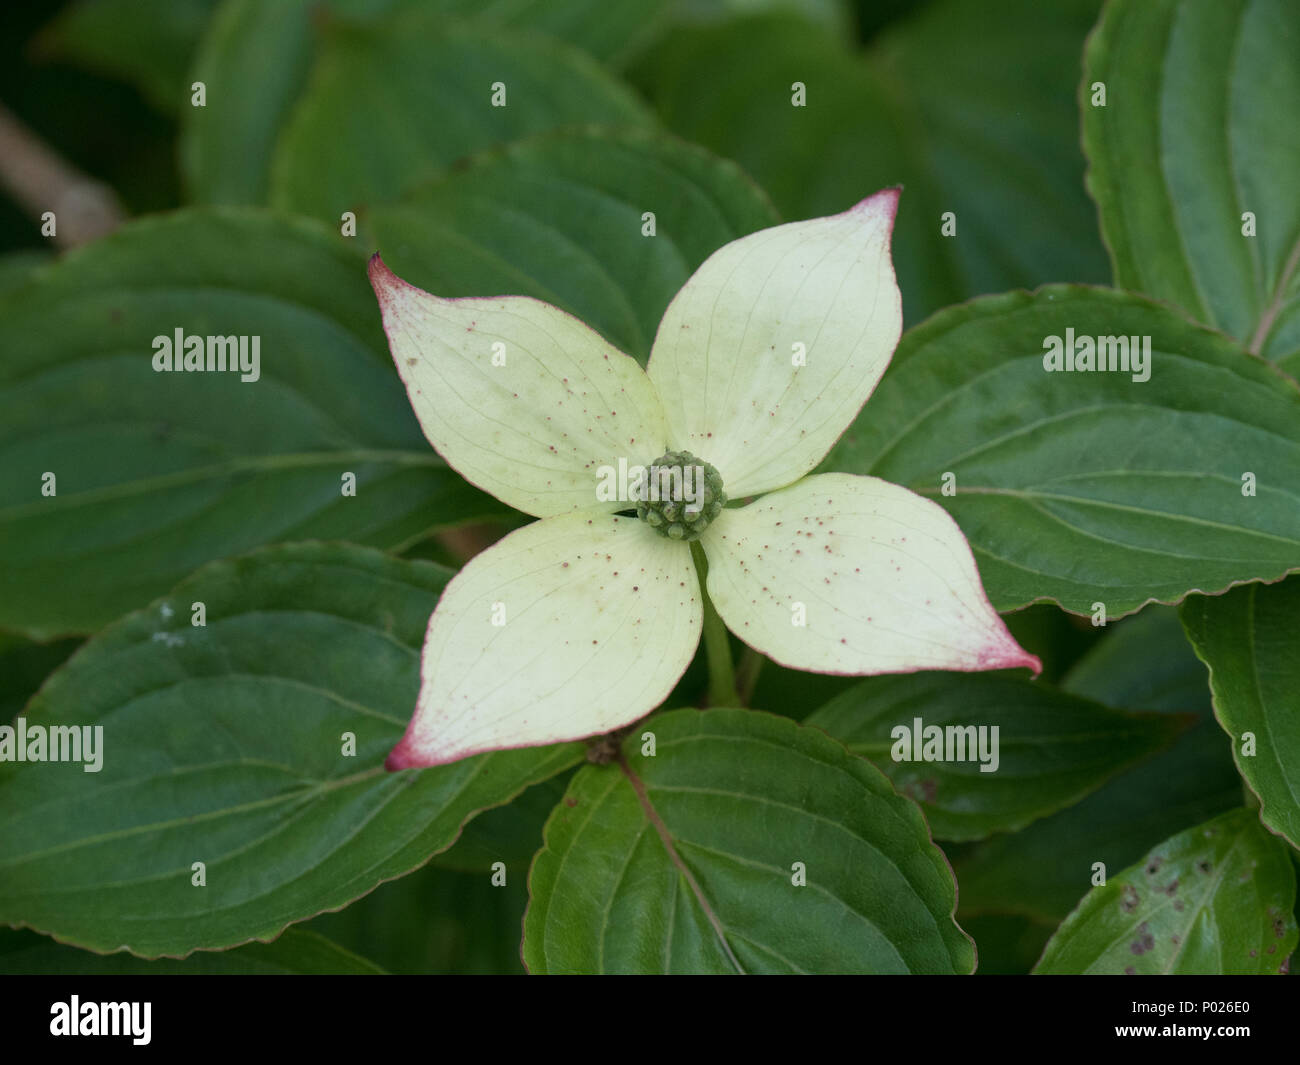 A single flower of Cornus kousa showing the pink tips to the creamy white petals Stock Photo